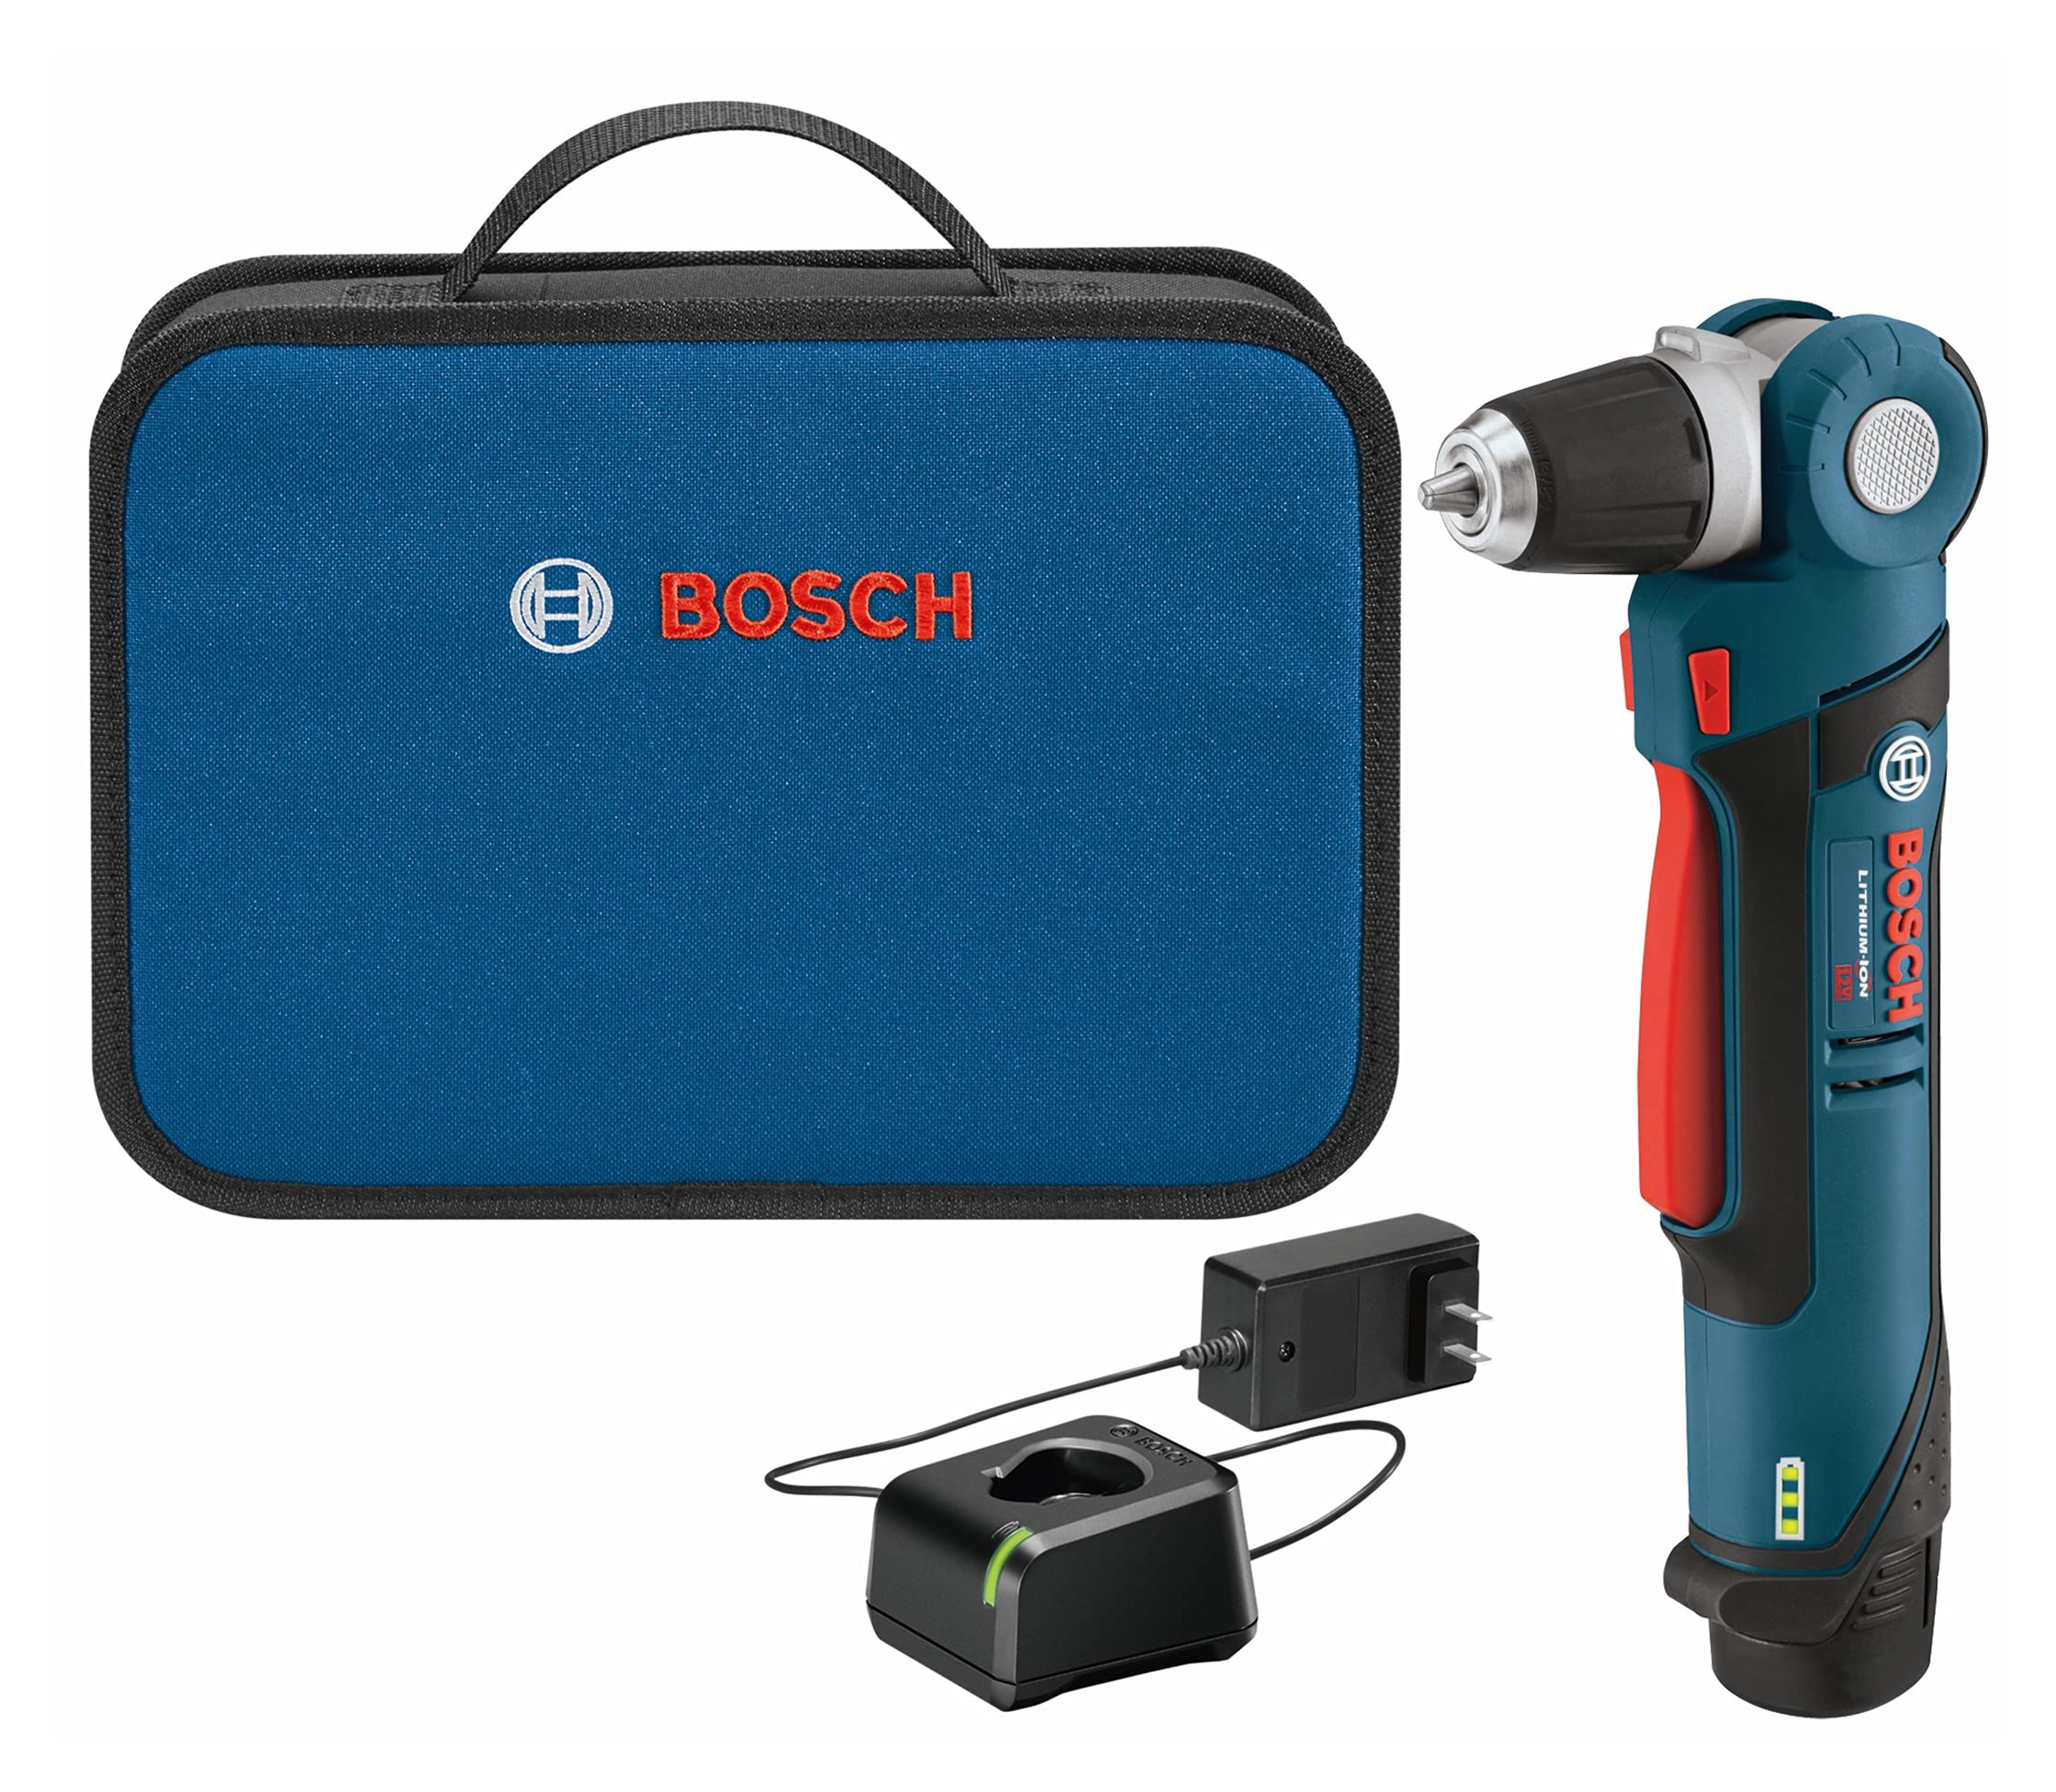 Amazon.com: BOSCH PS11-102 12V Max 3/8 In. Right Angle Drill/Driver Kit with 2.0Ah Lithium Ion Battery